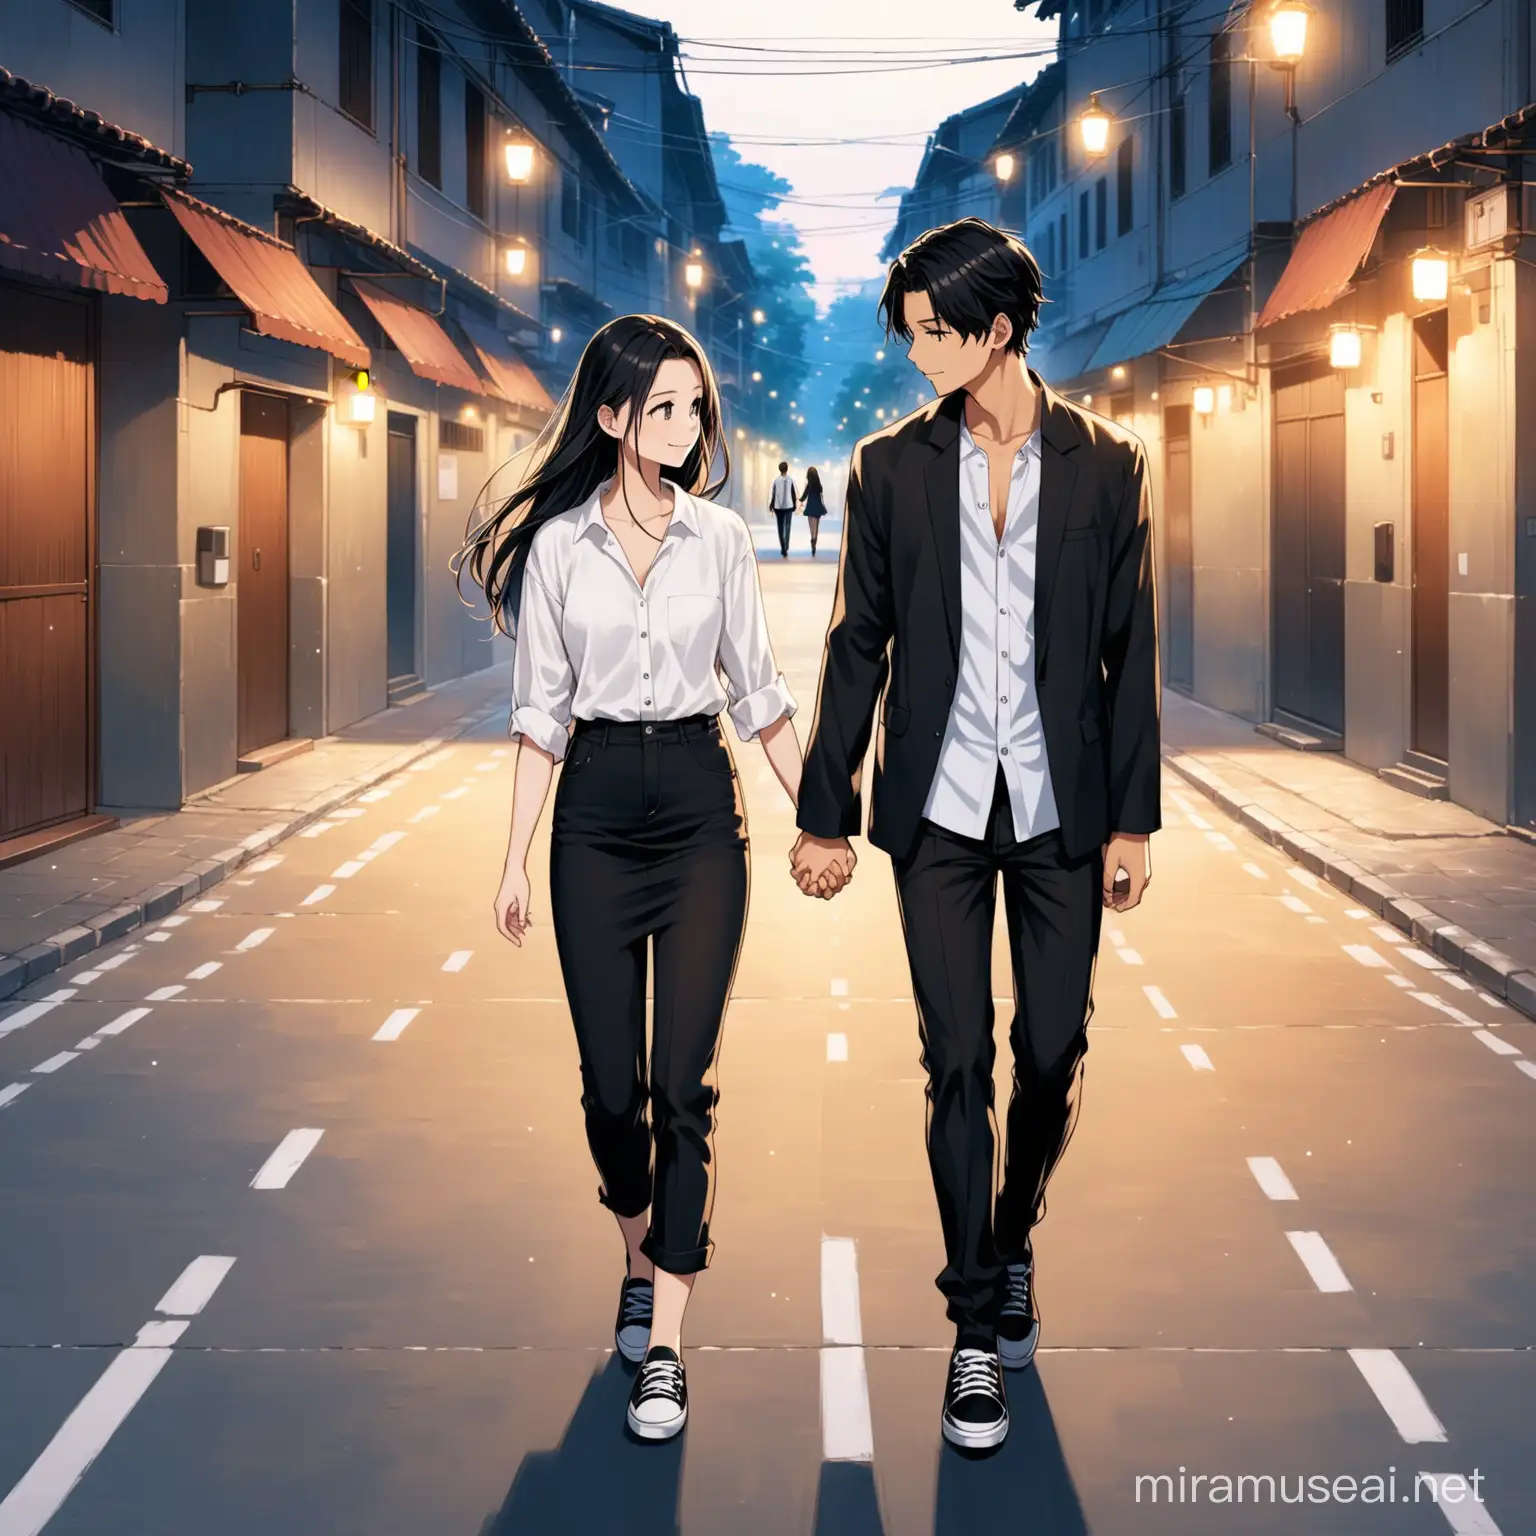 Young Couple in Love Walking Together on a Brightly Lit Street